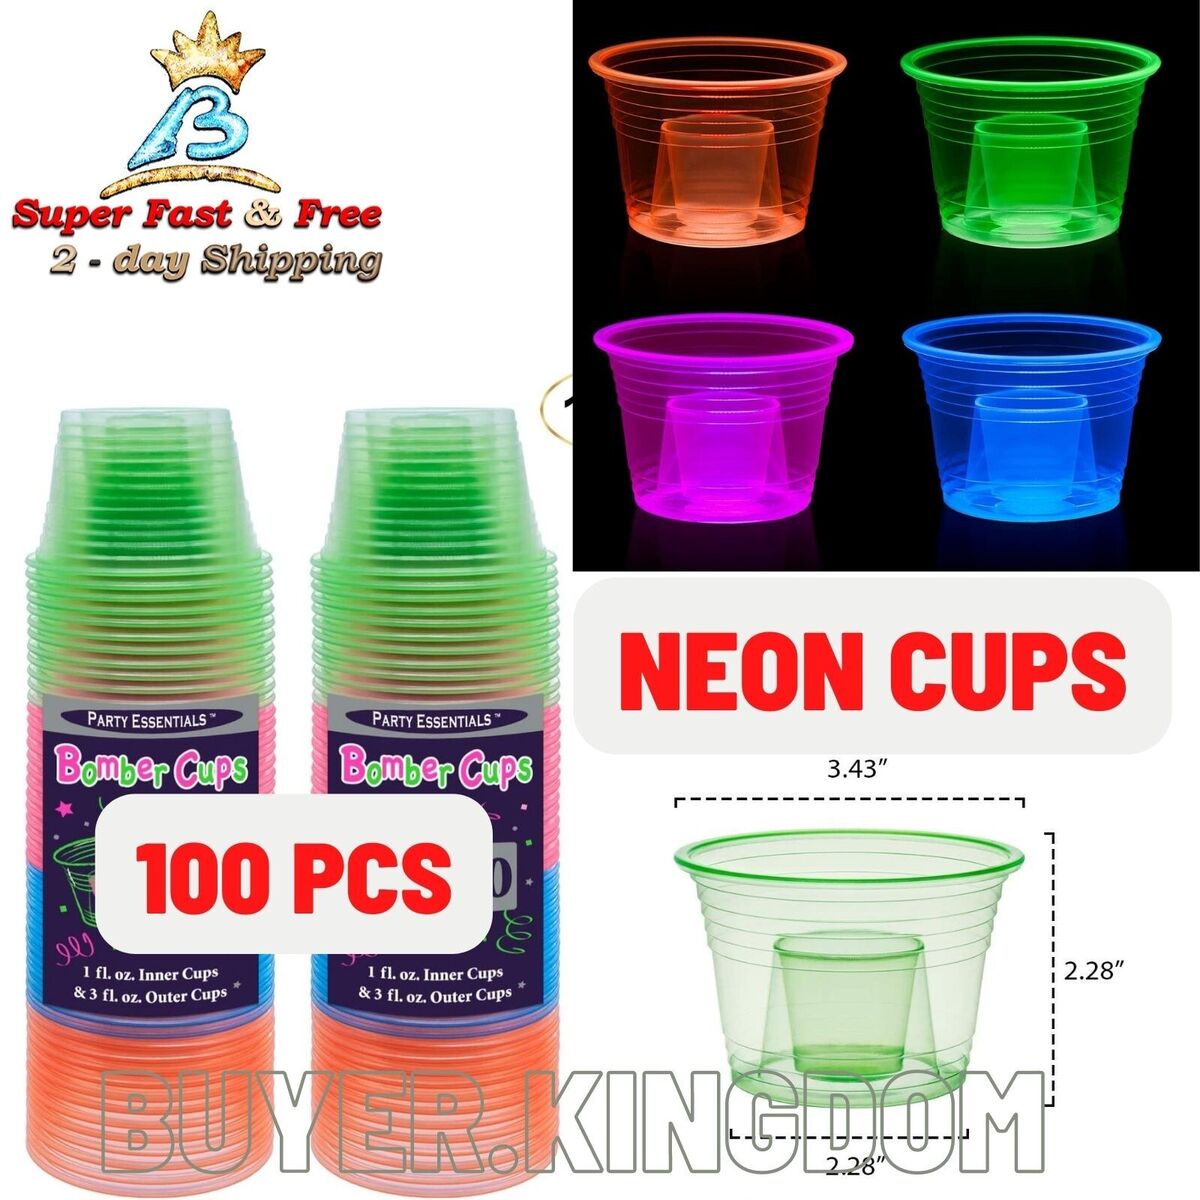 Plastic Bomber Cups Jager Bomb Party Shot Glasses Neon Pack 100 | eBay